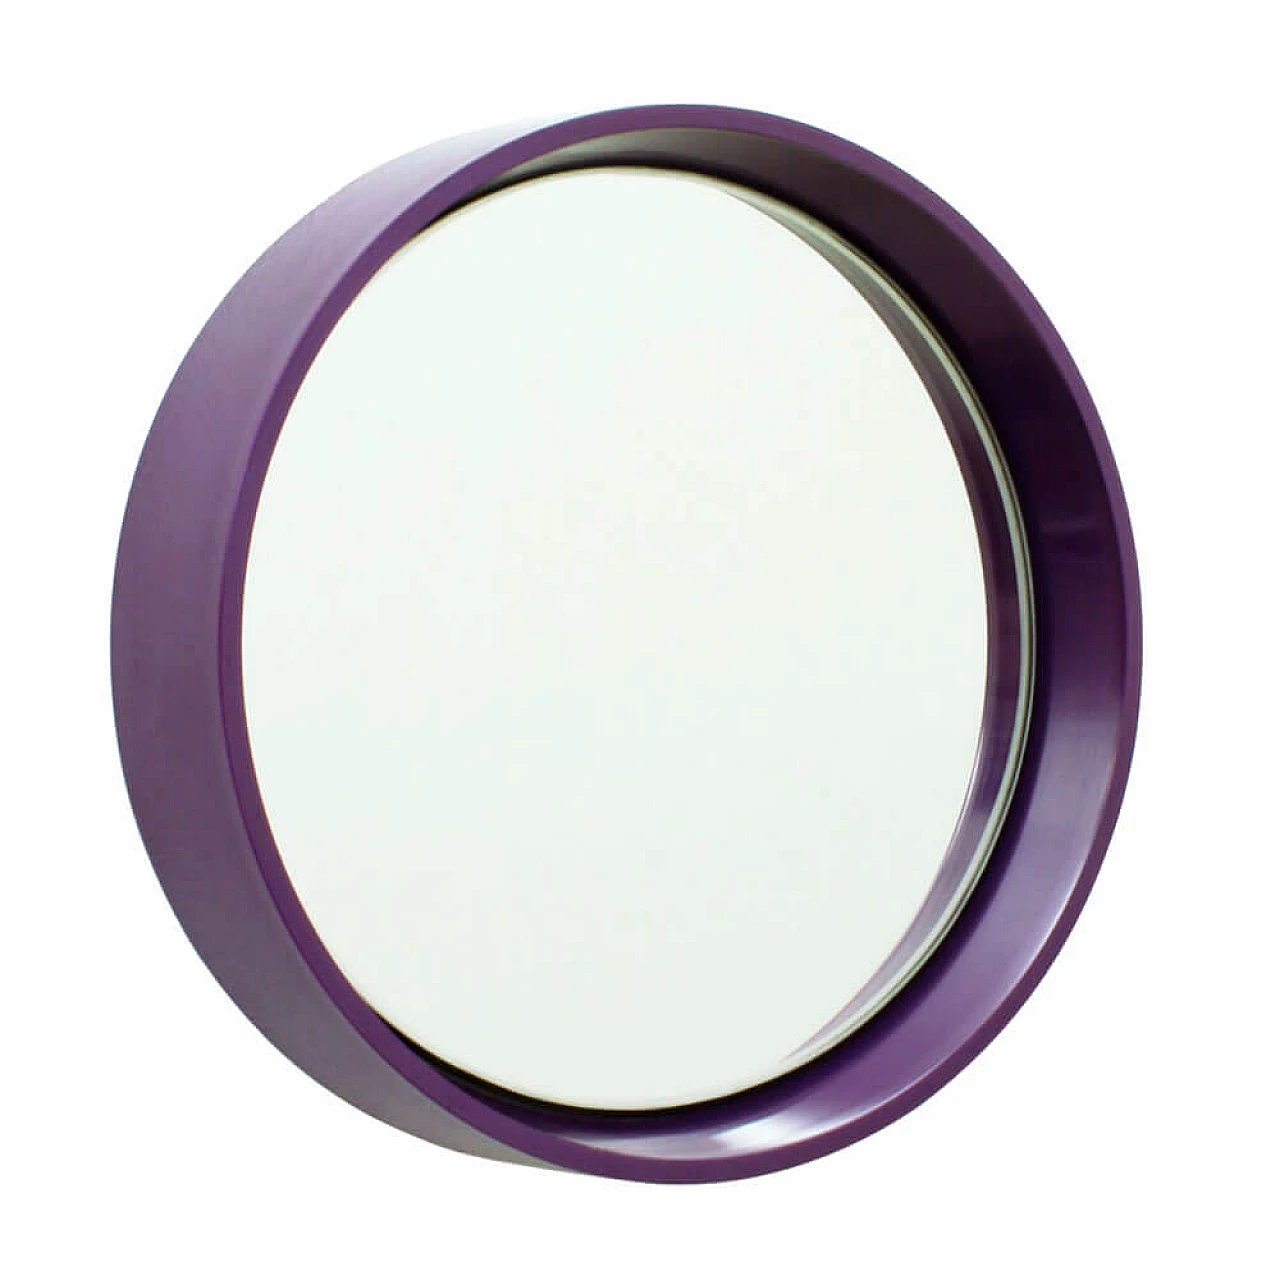 Small round mirror with purple frame, 70's 1091255